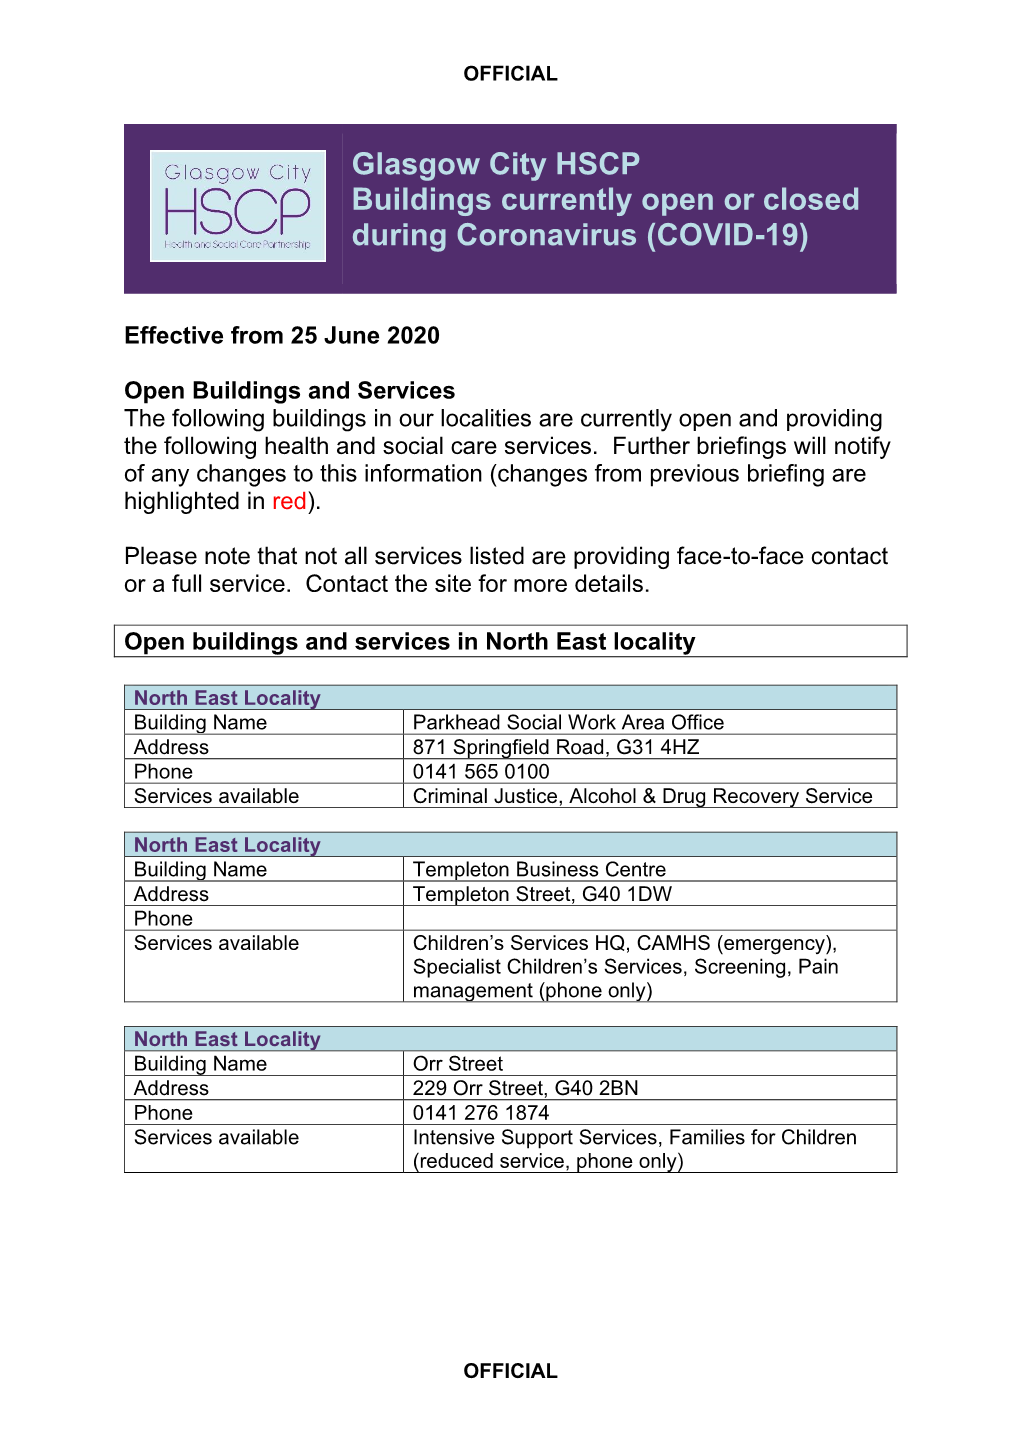 Glasgow City HSCP Buildings Currently Open Or Closed During Coronavirus (COVID-19)